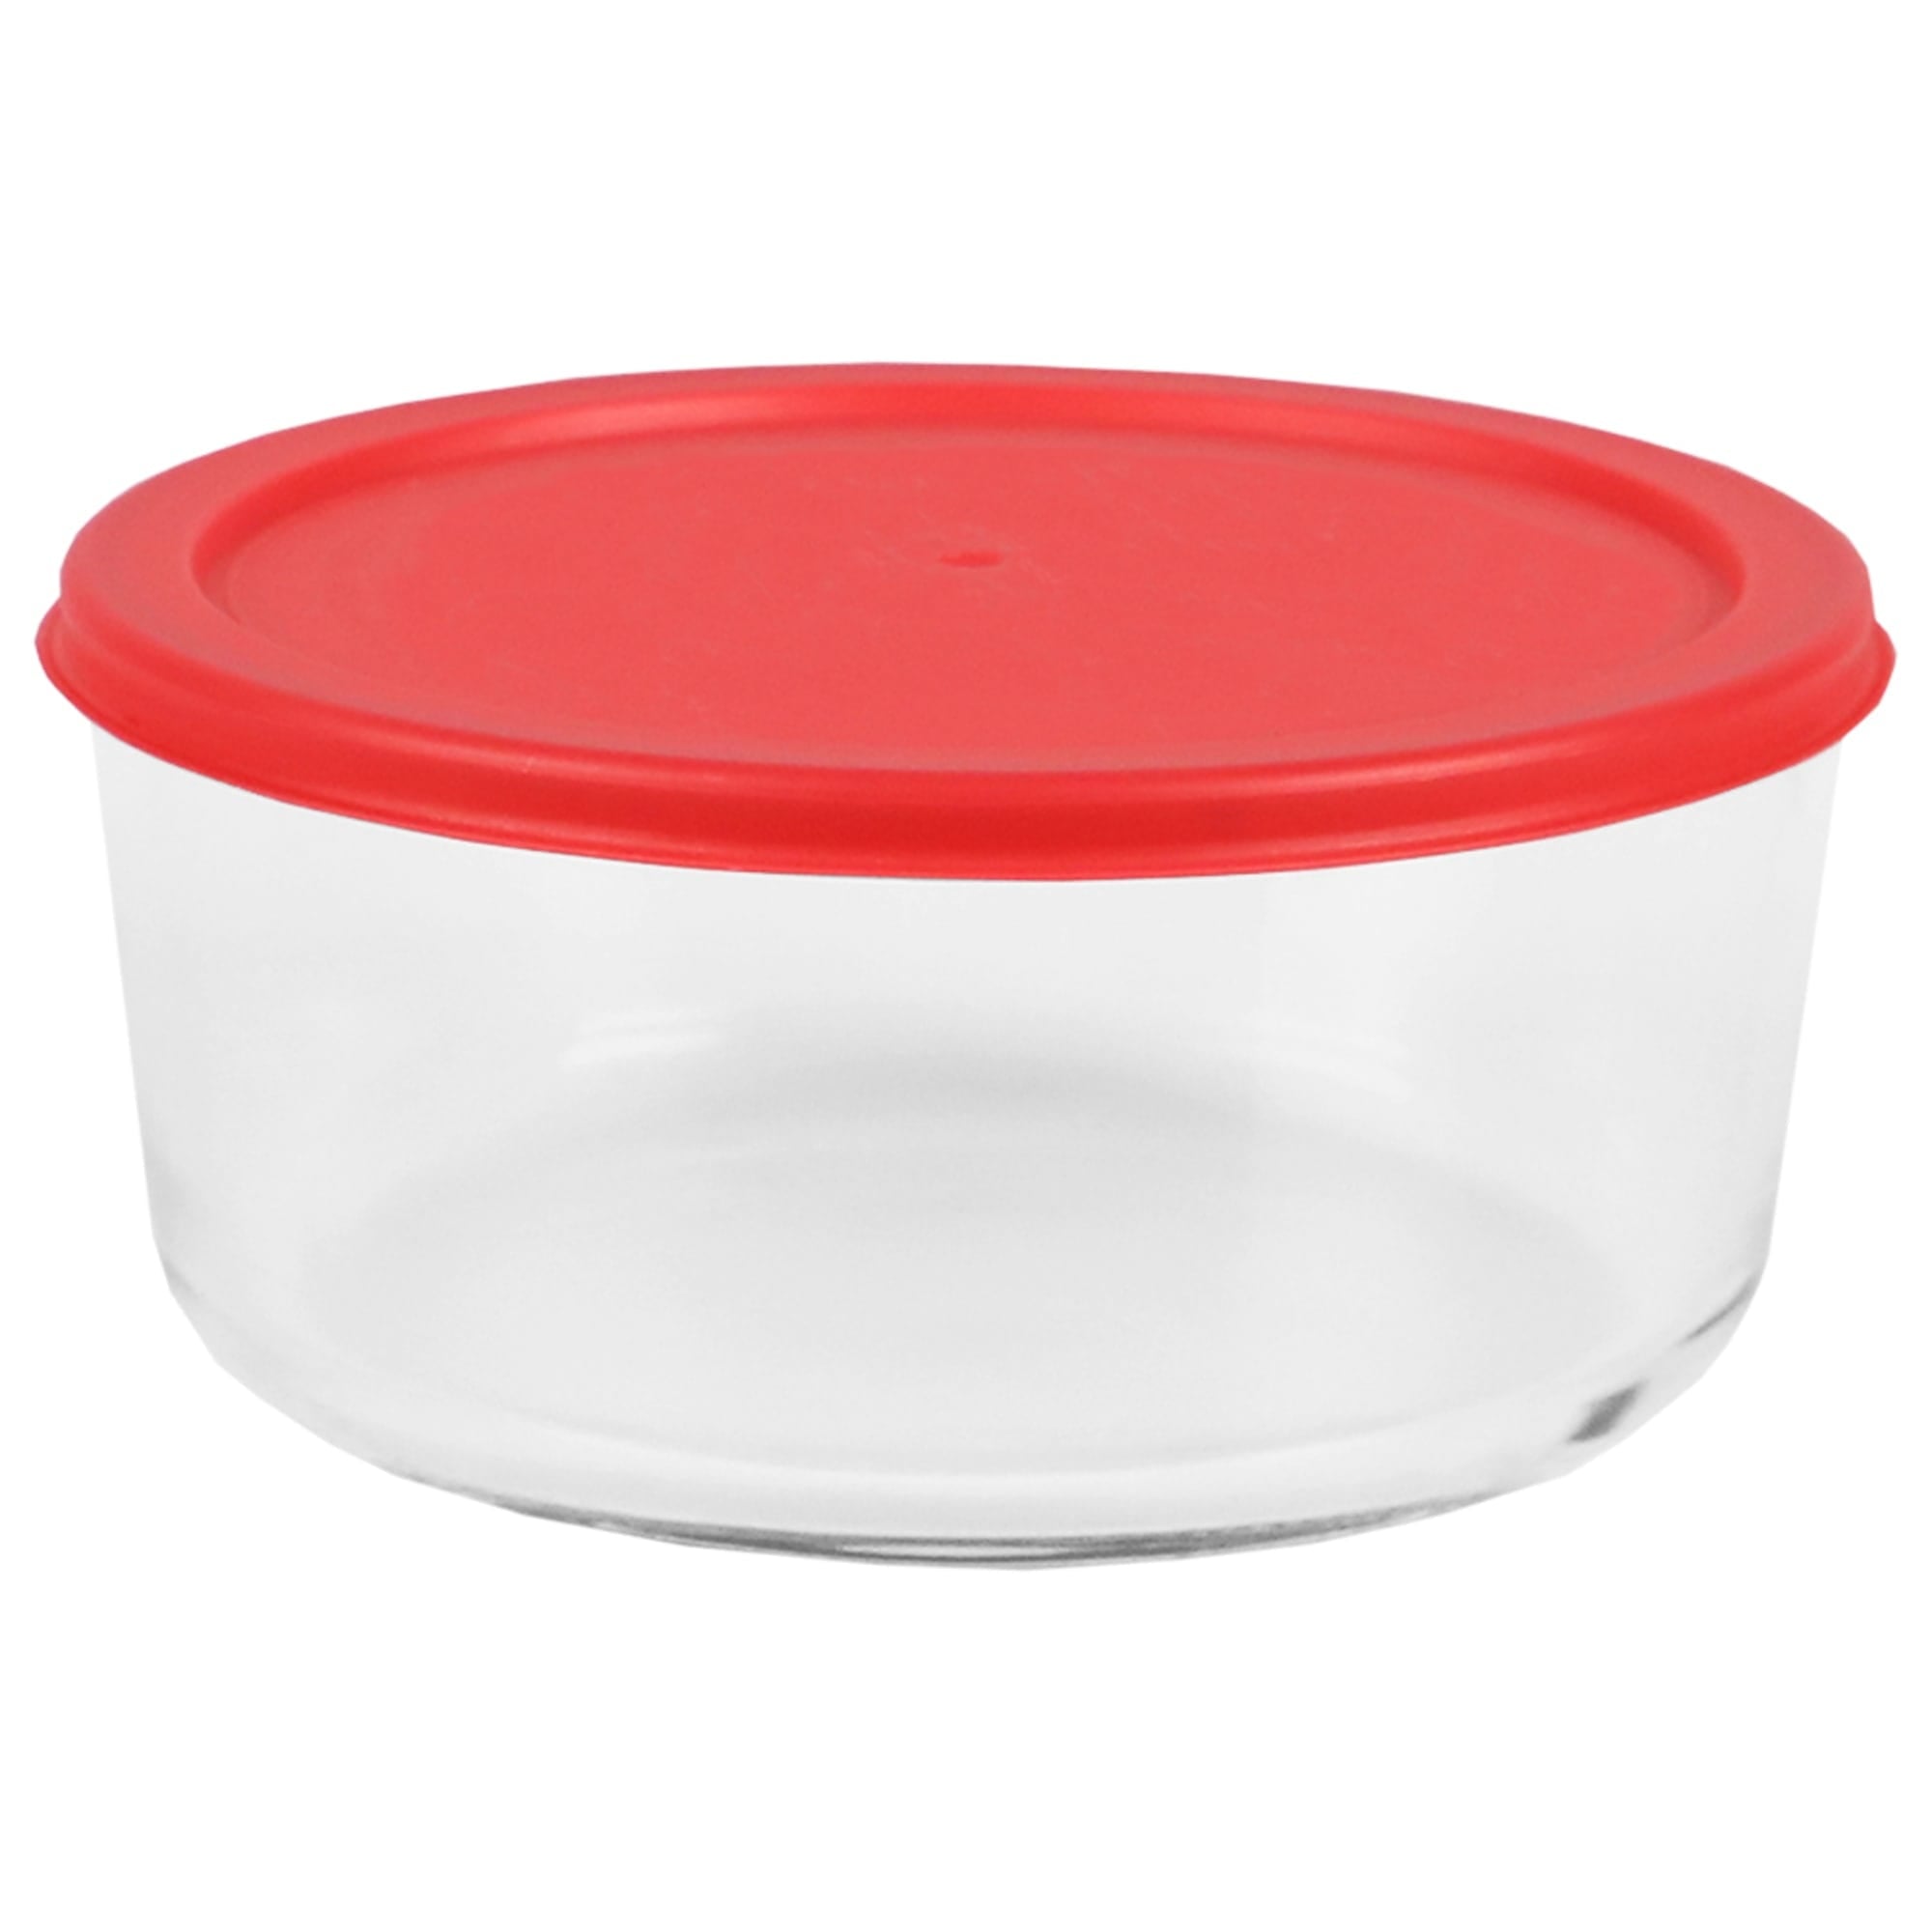 Home Basics Microwave Safe Plastic Round Food Storage Containers